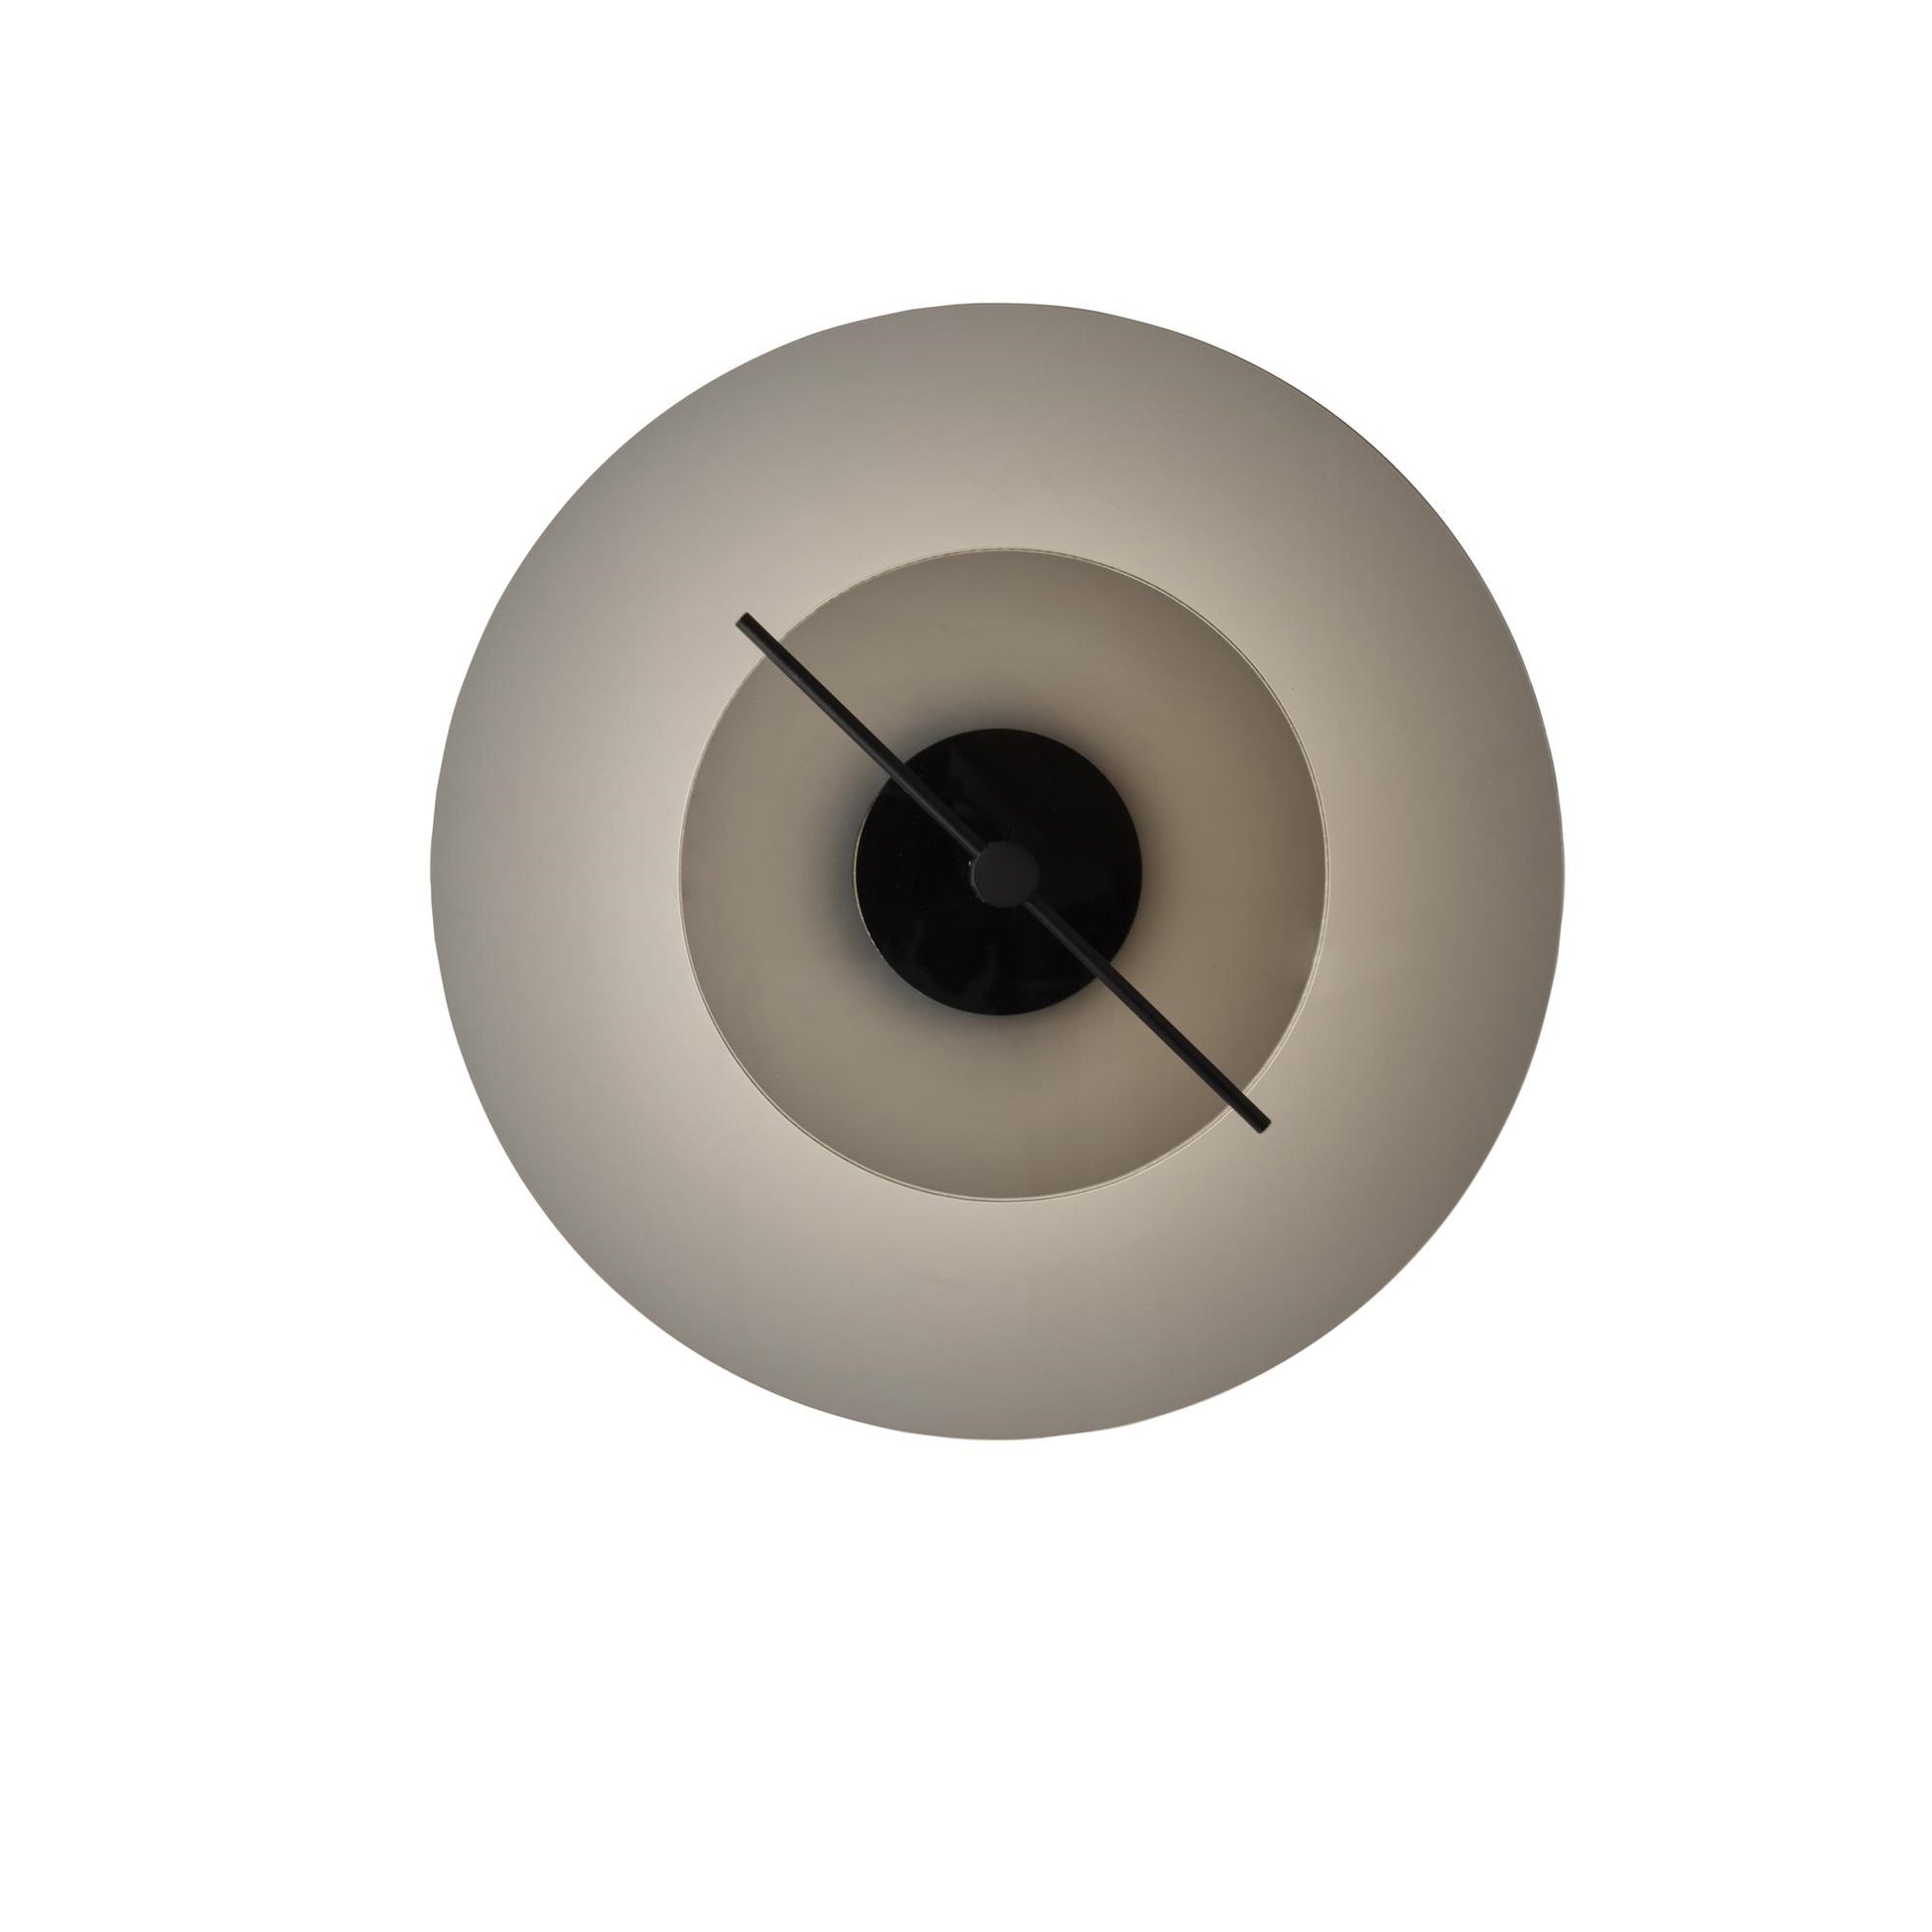 Delumina Wall Lamp Ø32 by DCW éditions #Black